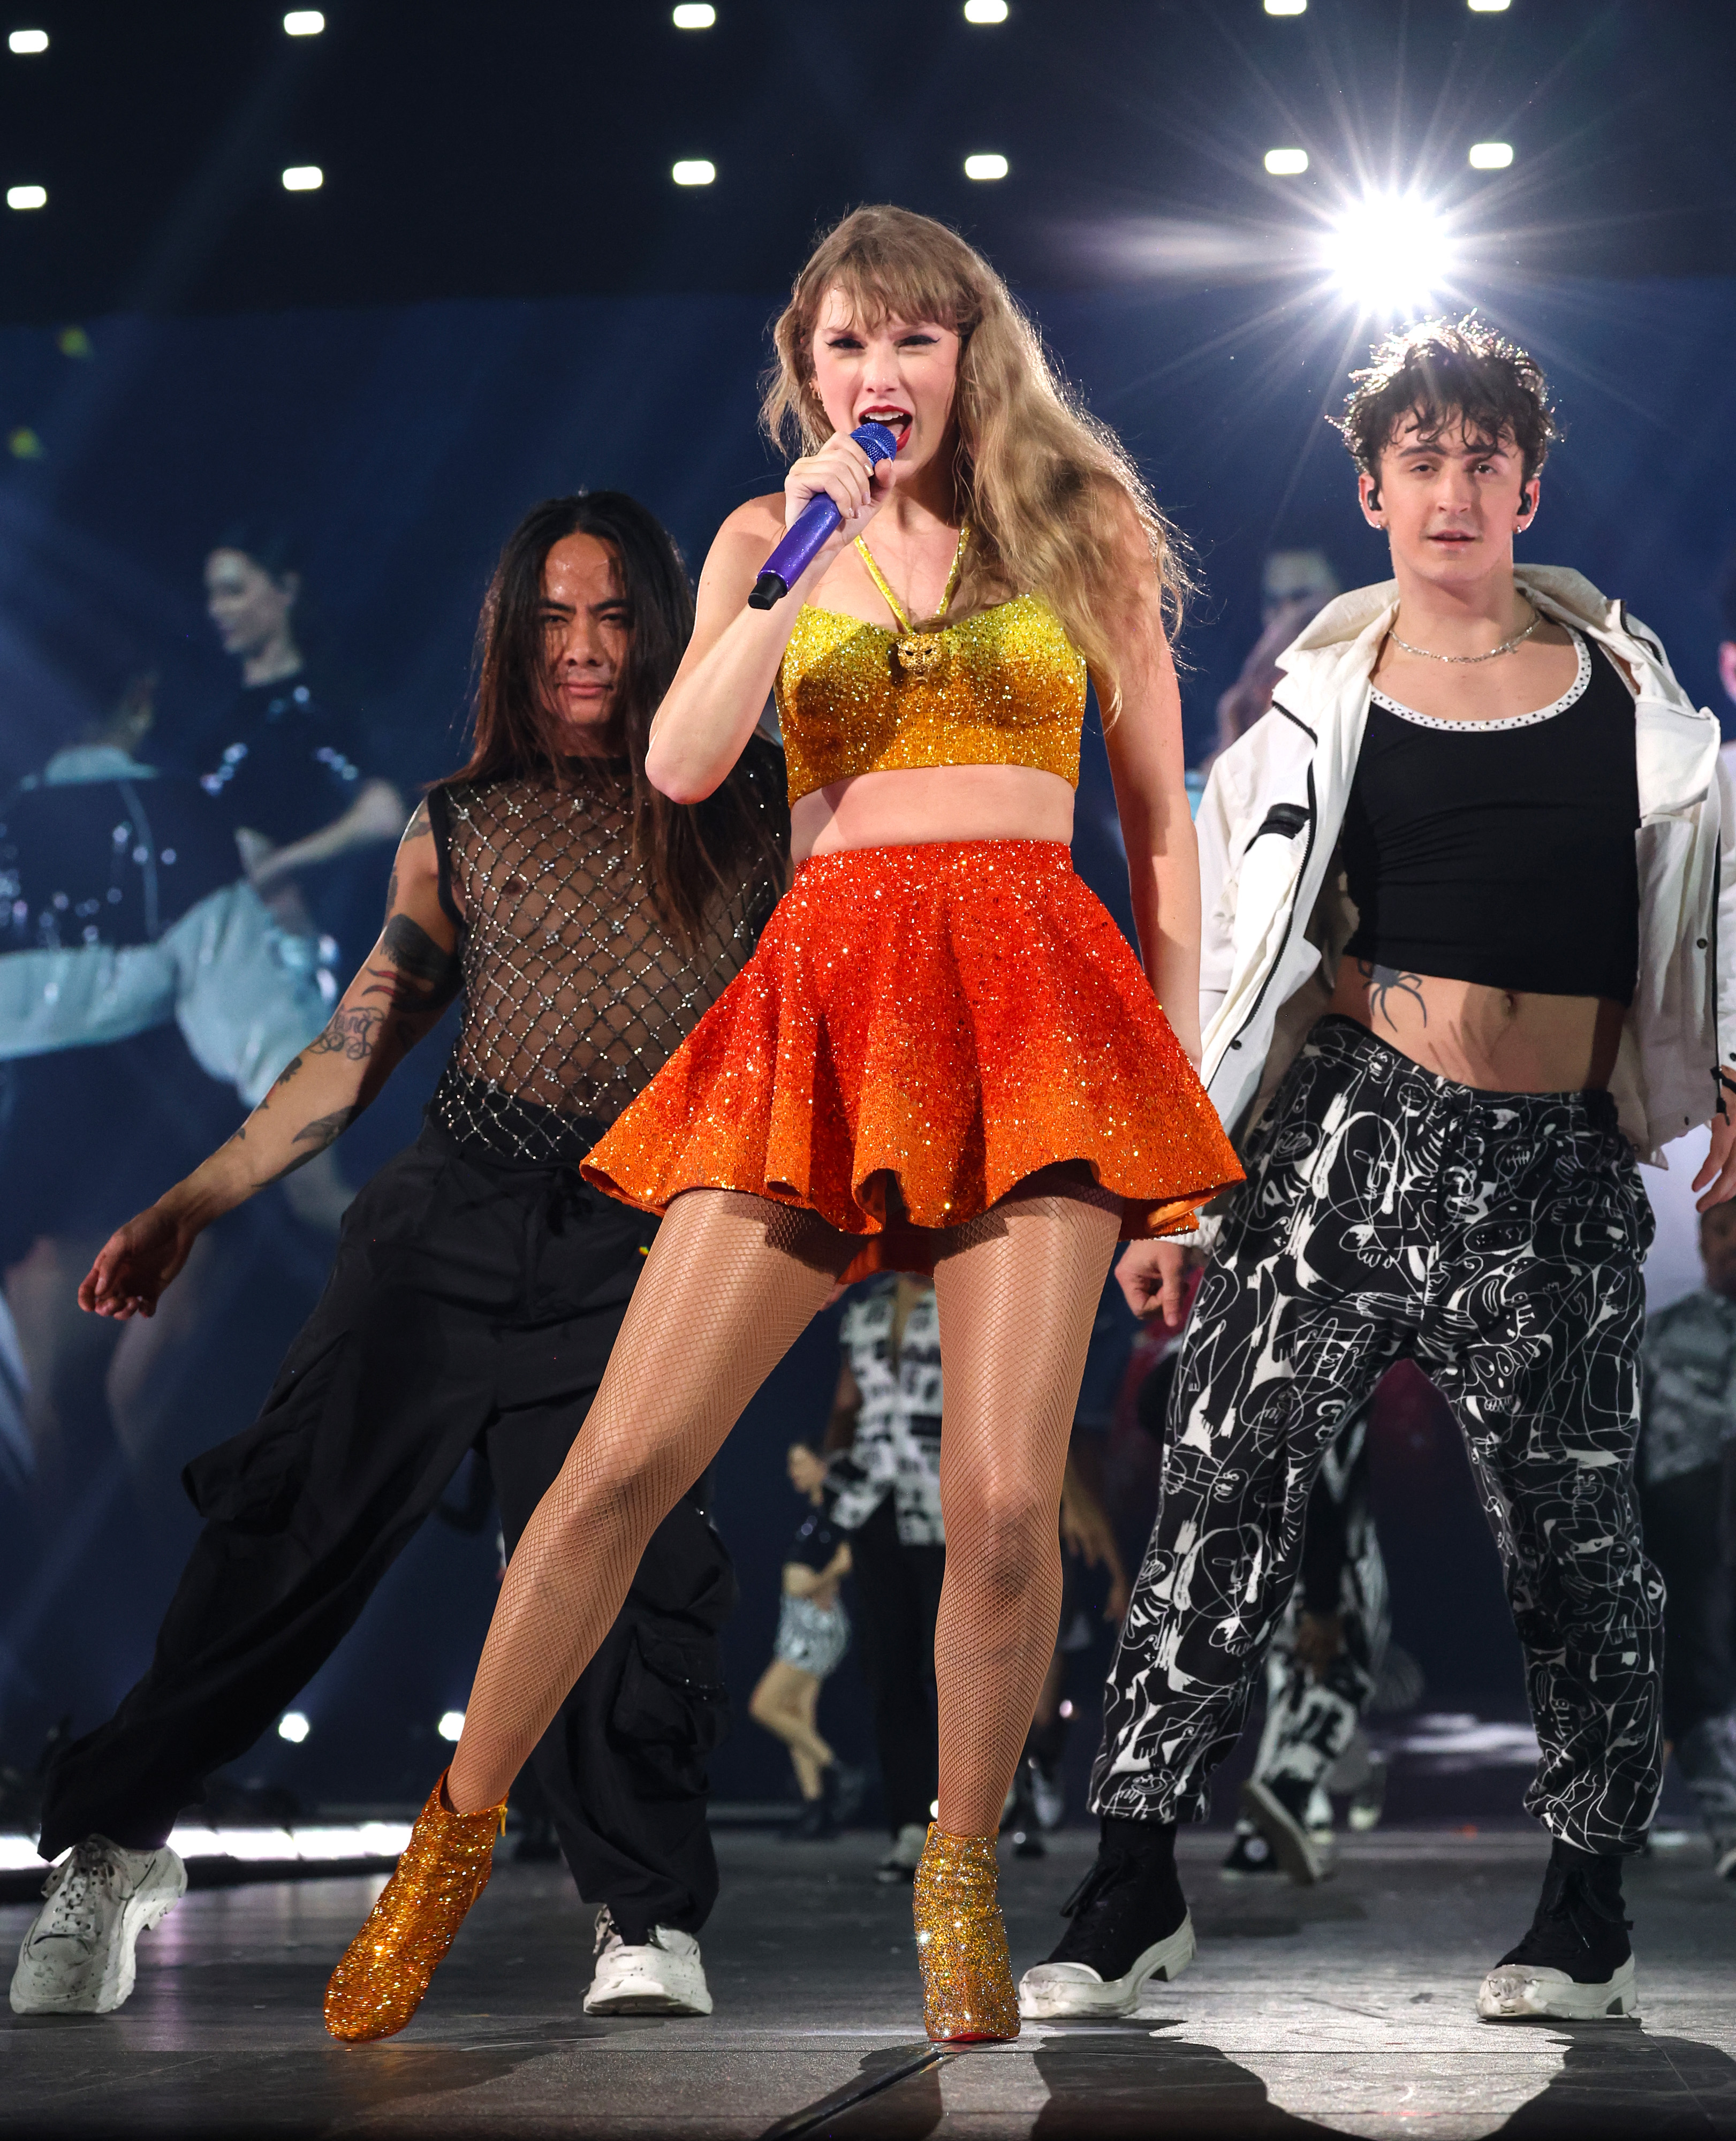 The pop star donned a glittery yellow crop top and a sparking red skirt as she rocked the stage